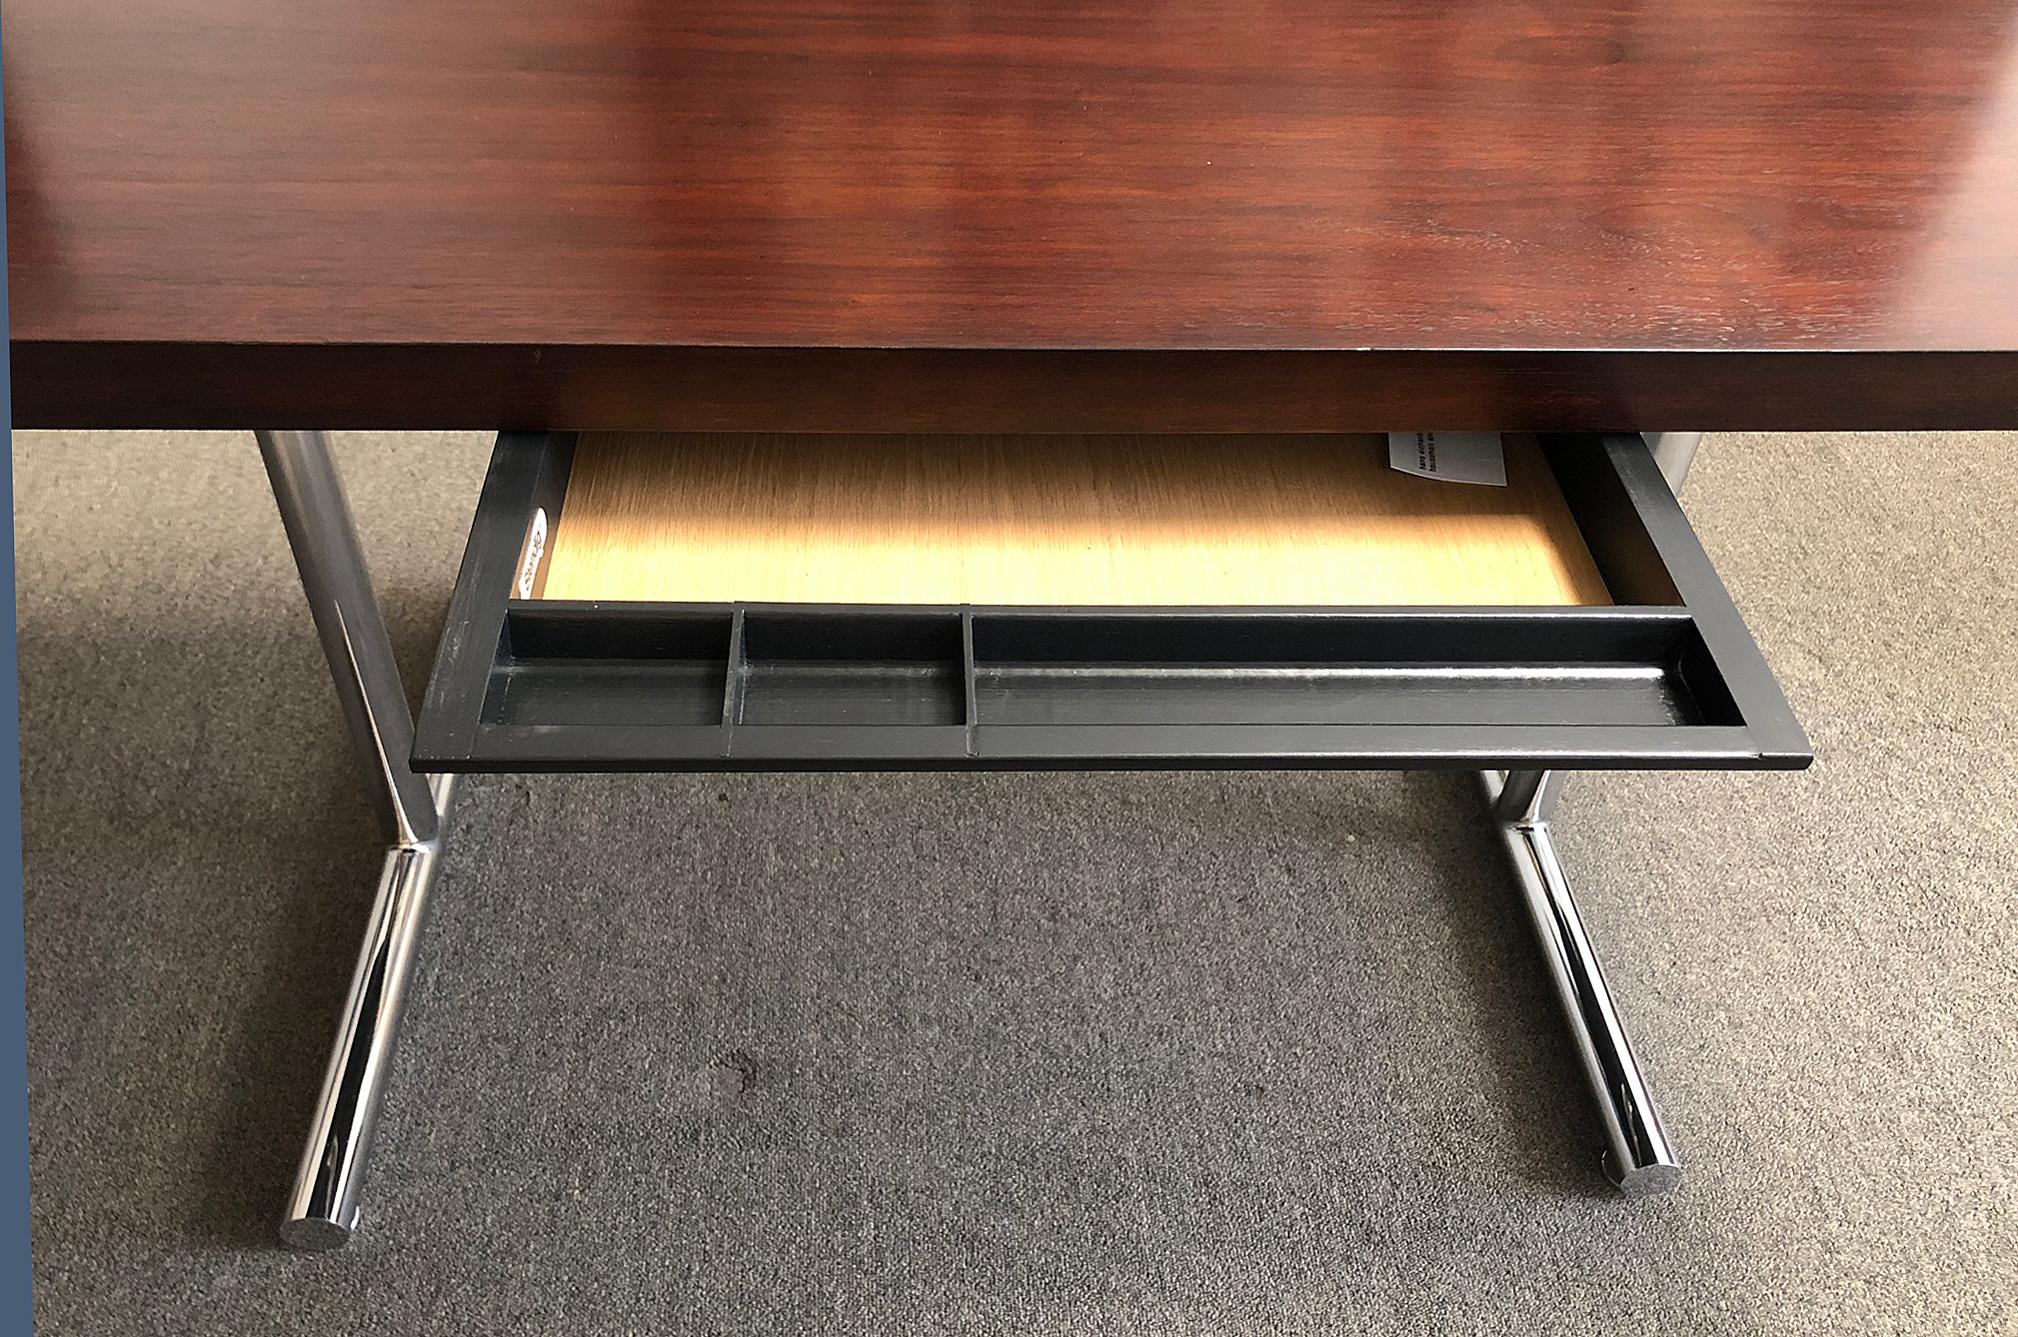 Mahogany and steel single drawer table desk. Designed by Hans Eichenberg, made by Haussman and Hausmann fo Stendig. Top quality craftsmanship and materials.